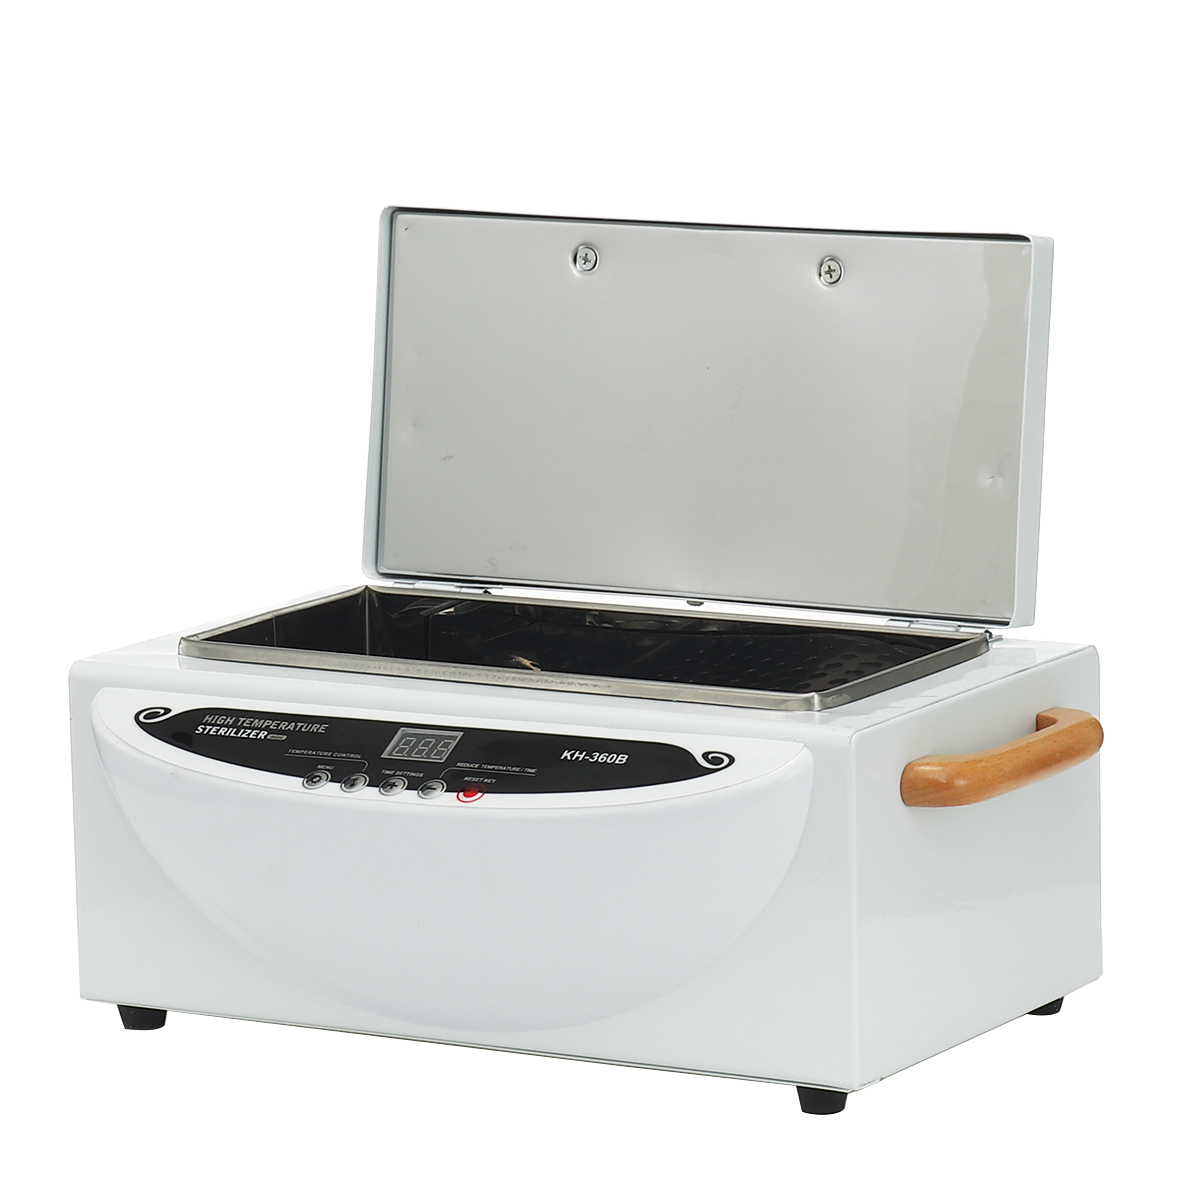 500W-110220V-Spa-Sterilizer-Beauty-Manicure-Nail-Tool-Cabinet-Disinfection-Box-1679830-6